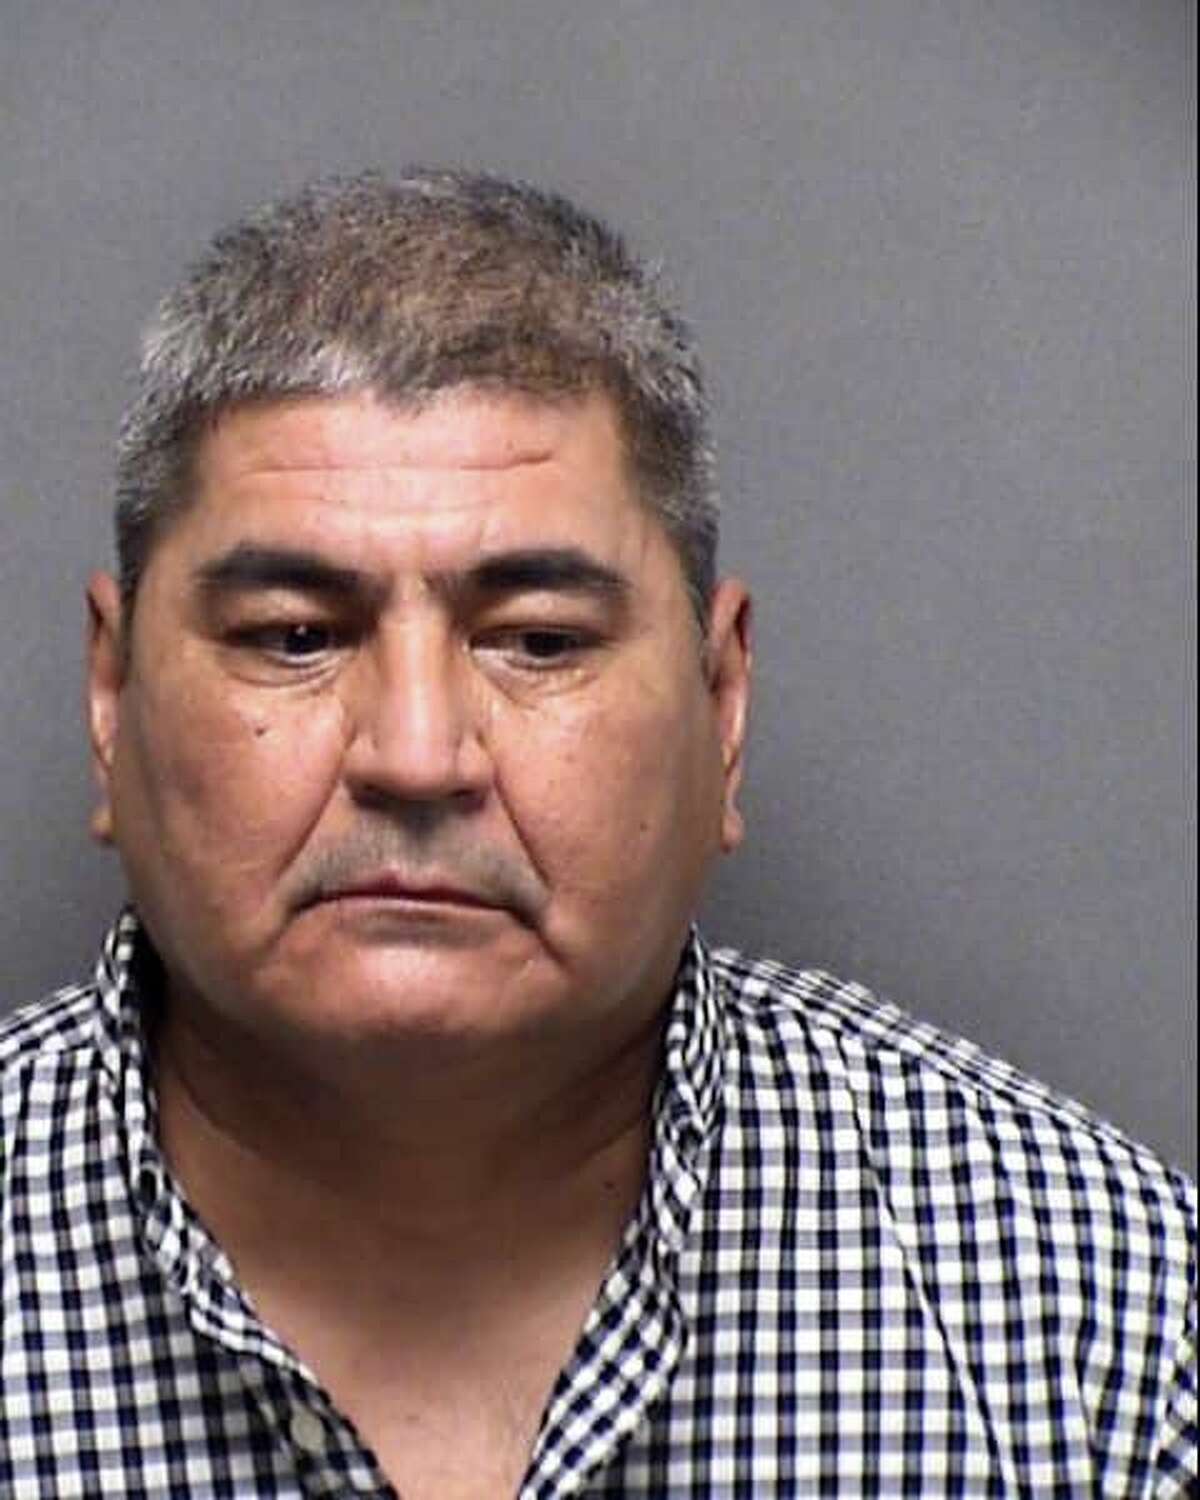 Eduardo Lee Saucedo, 50, was charged with aggravated robbery of a home in South Bexar County on March 19, 2022.